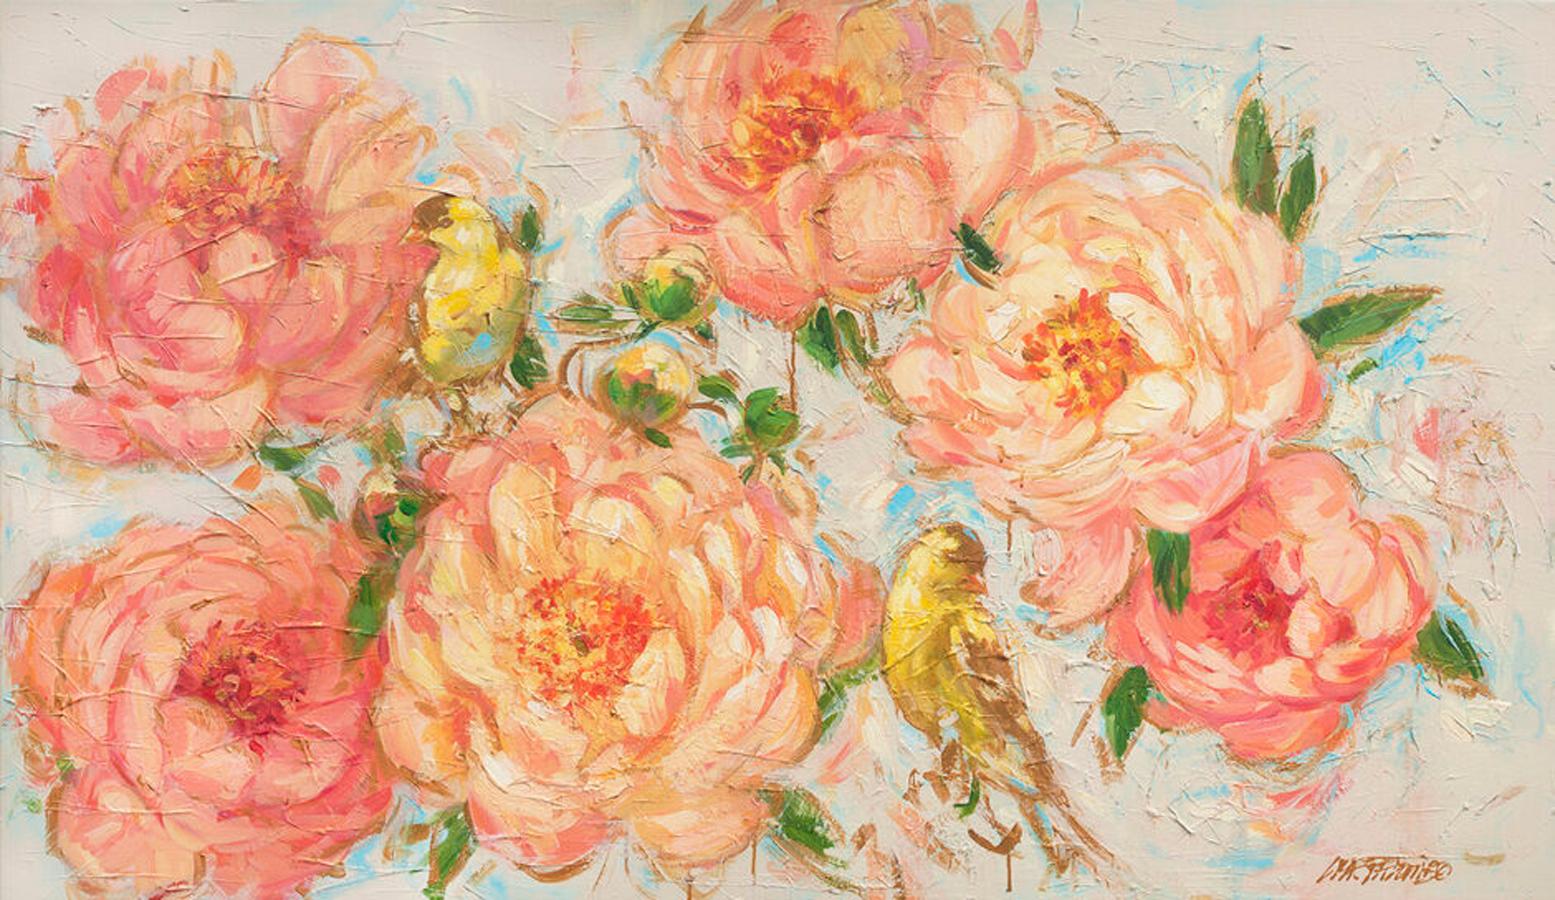 Lisa Palombo "Coral Sunset" Pink Floral and Yellow Birds Acrylic on Canvas, 2020